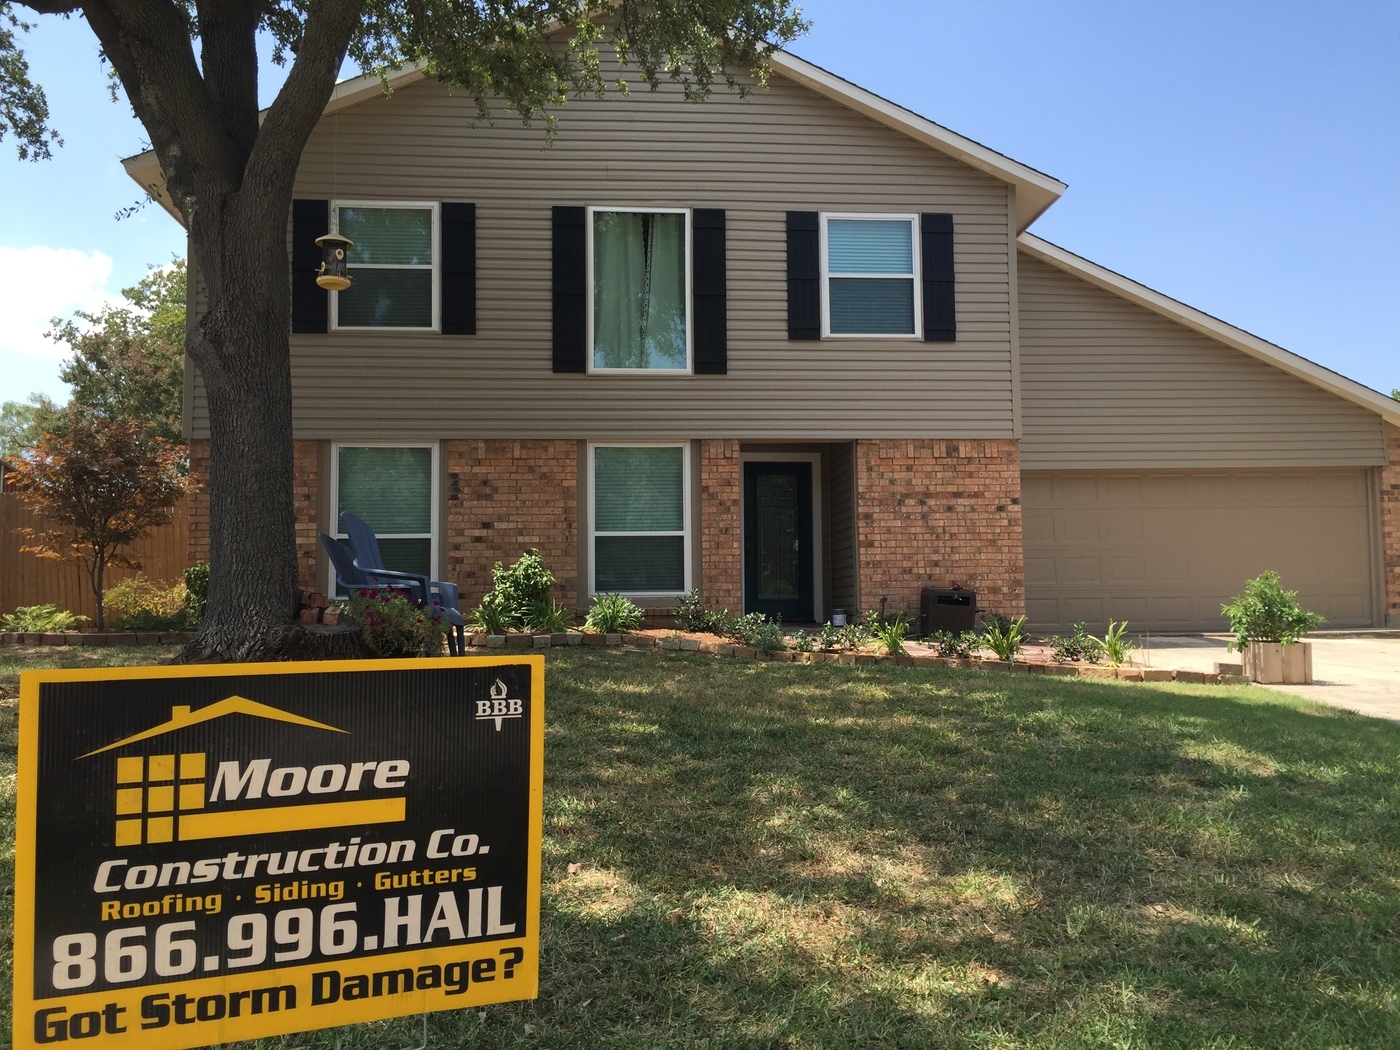 Moore Construction Co. is a team of experienced roofing contractors in Texas. They currently serve customers in Carrollton, Dallas, Frisco, Richardson, Plano, Farmers Branch, Irving, Flower Mound, Grapevine, Coppell, Euless, Bedford, Hurst, McKinney, Rowlett, Mesquite, Garland, and University Park.